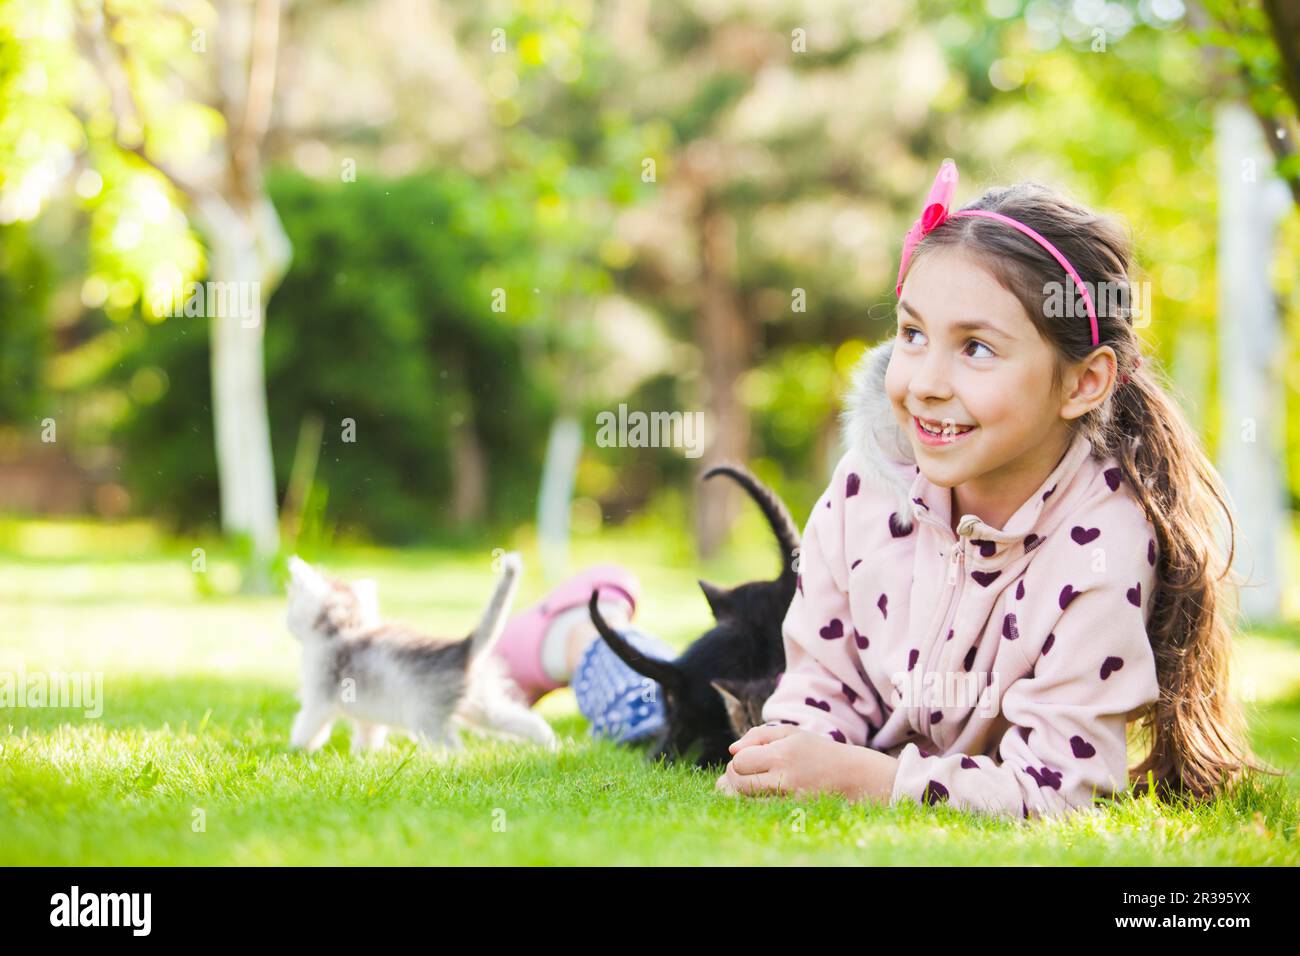 Outdoor portrait of cute girl playing with small kittens Stock Photo